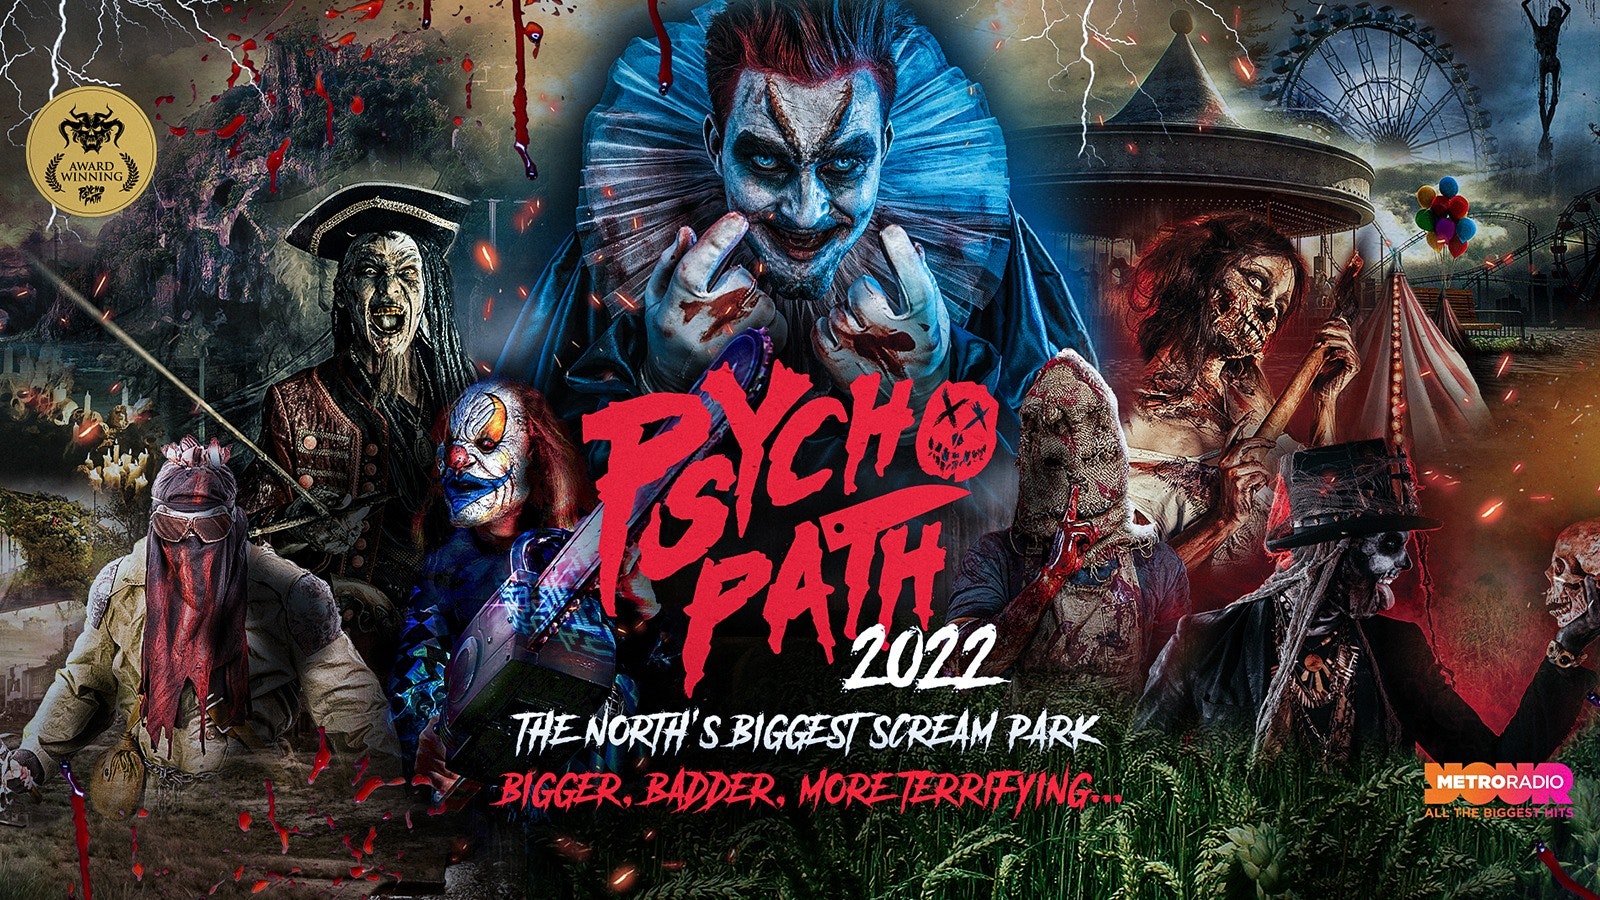 Psycho Path Presents FearGround – Oct 31st